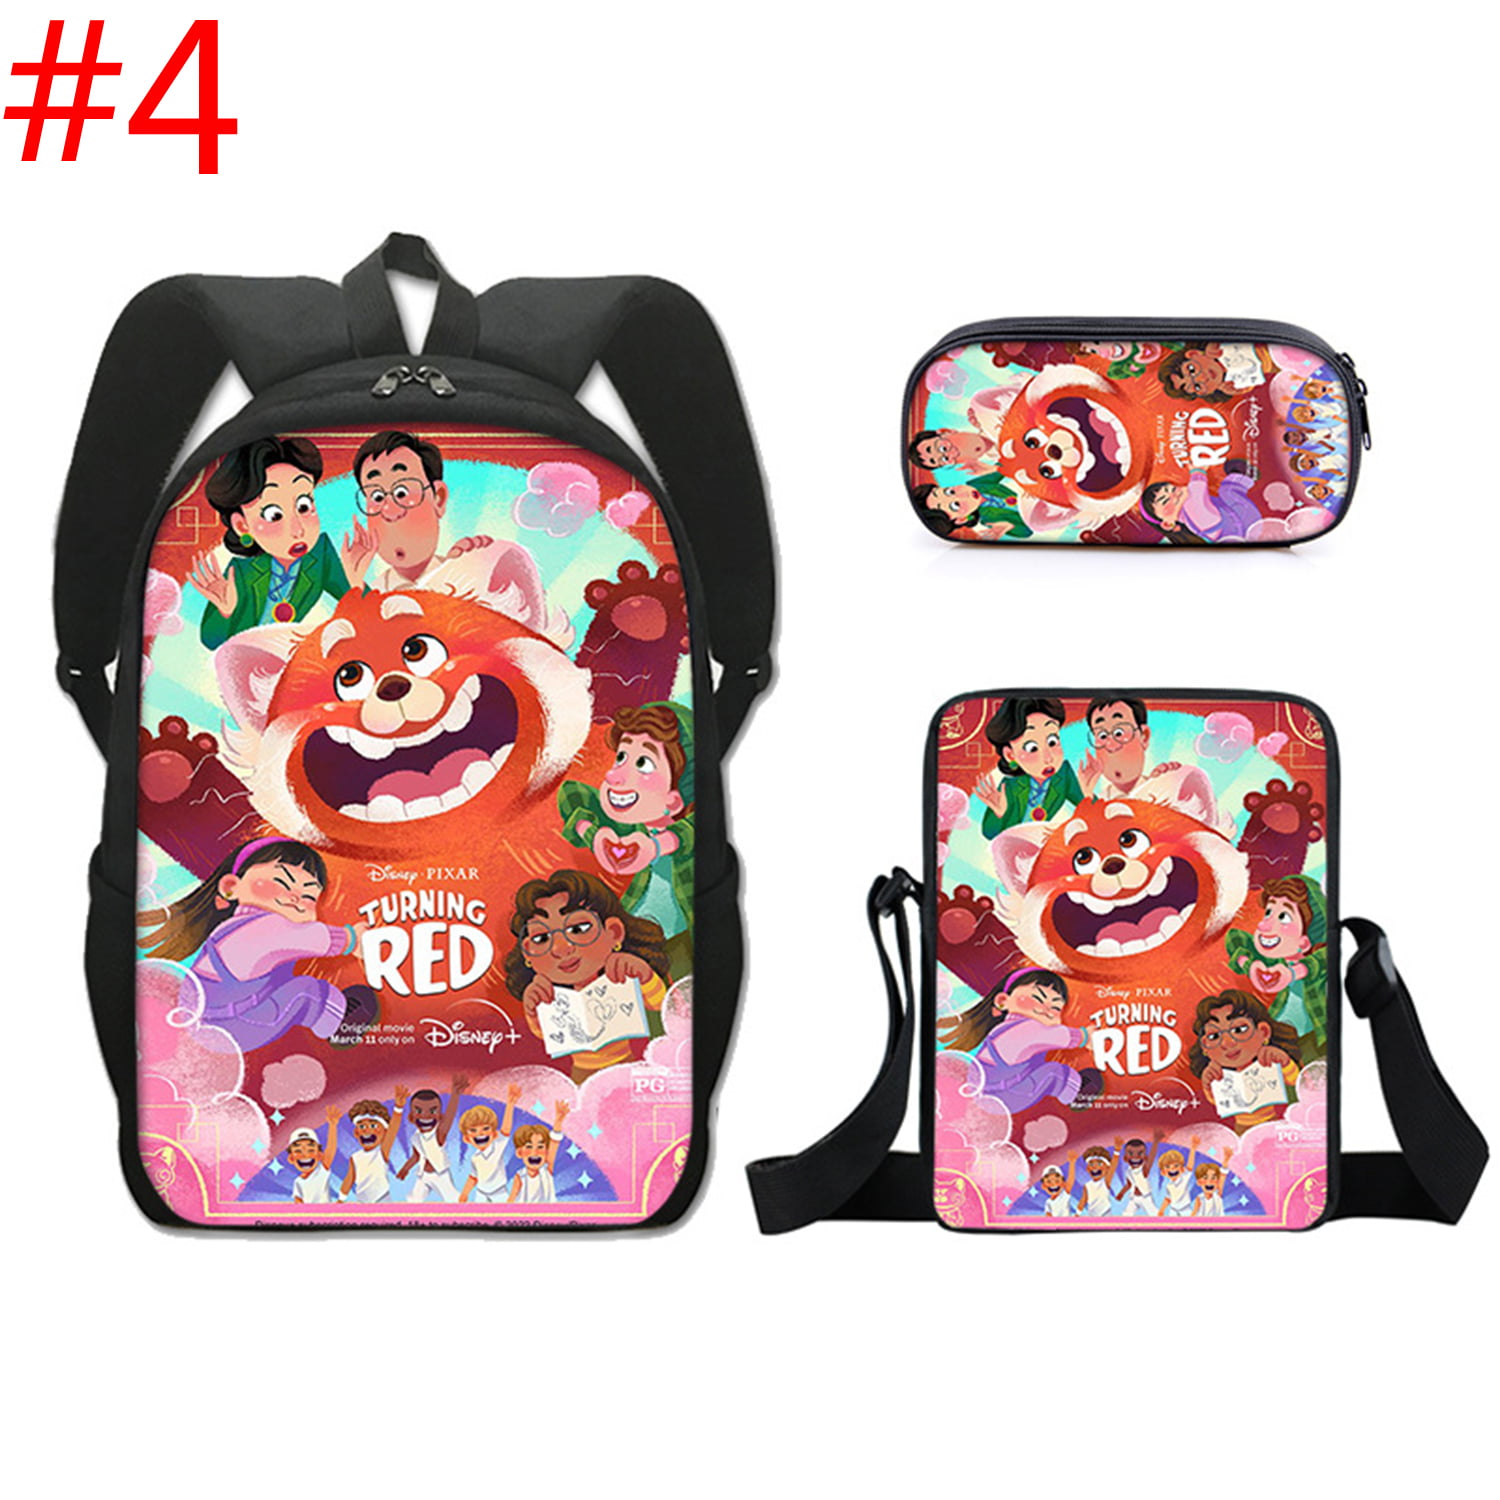 Turning Red Print School Bag Backpack Boys Girls 3PCS Schoolbag with  Shoulder Bags Pencil Case (#4)